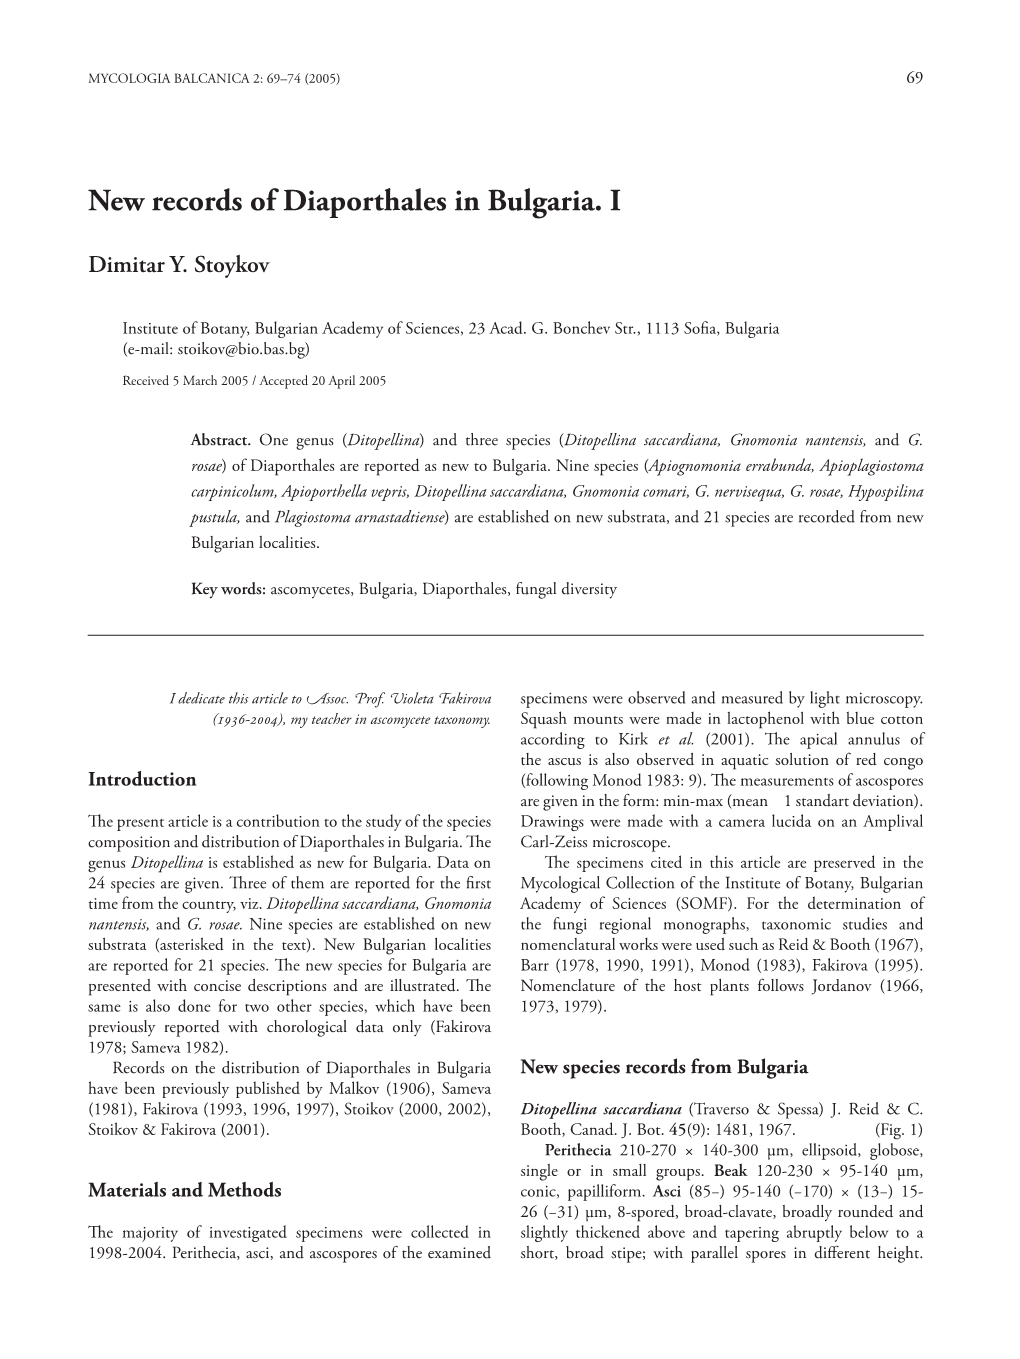 New Records of Diaporthales in Bulgaria. I